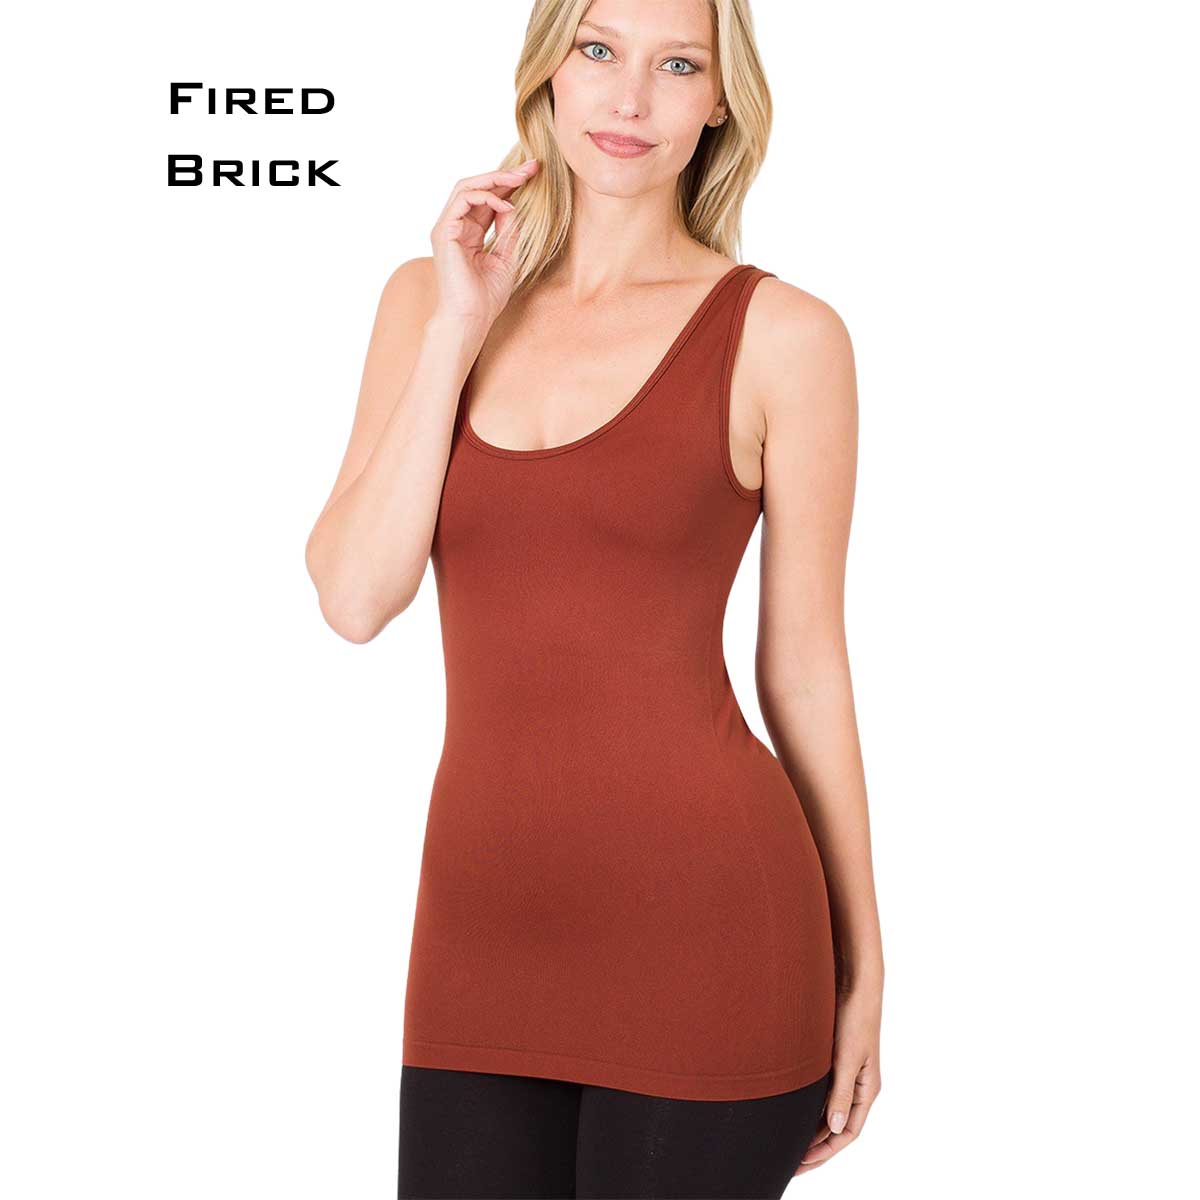 FIRED BRICK Scoop Neck Seamless Tank Top 6700 MB